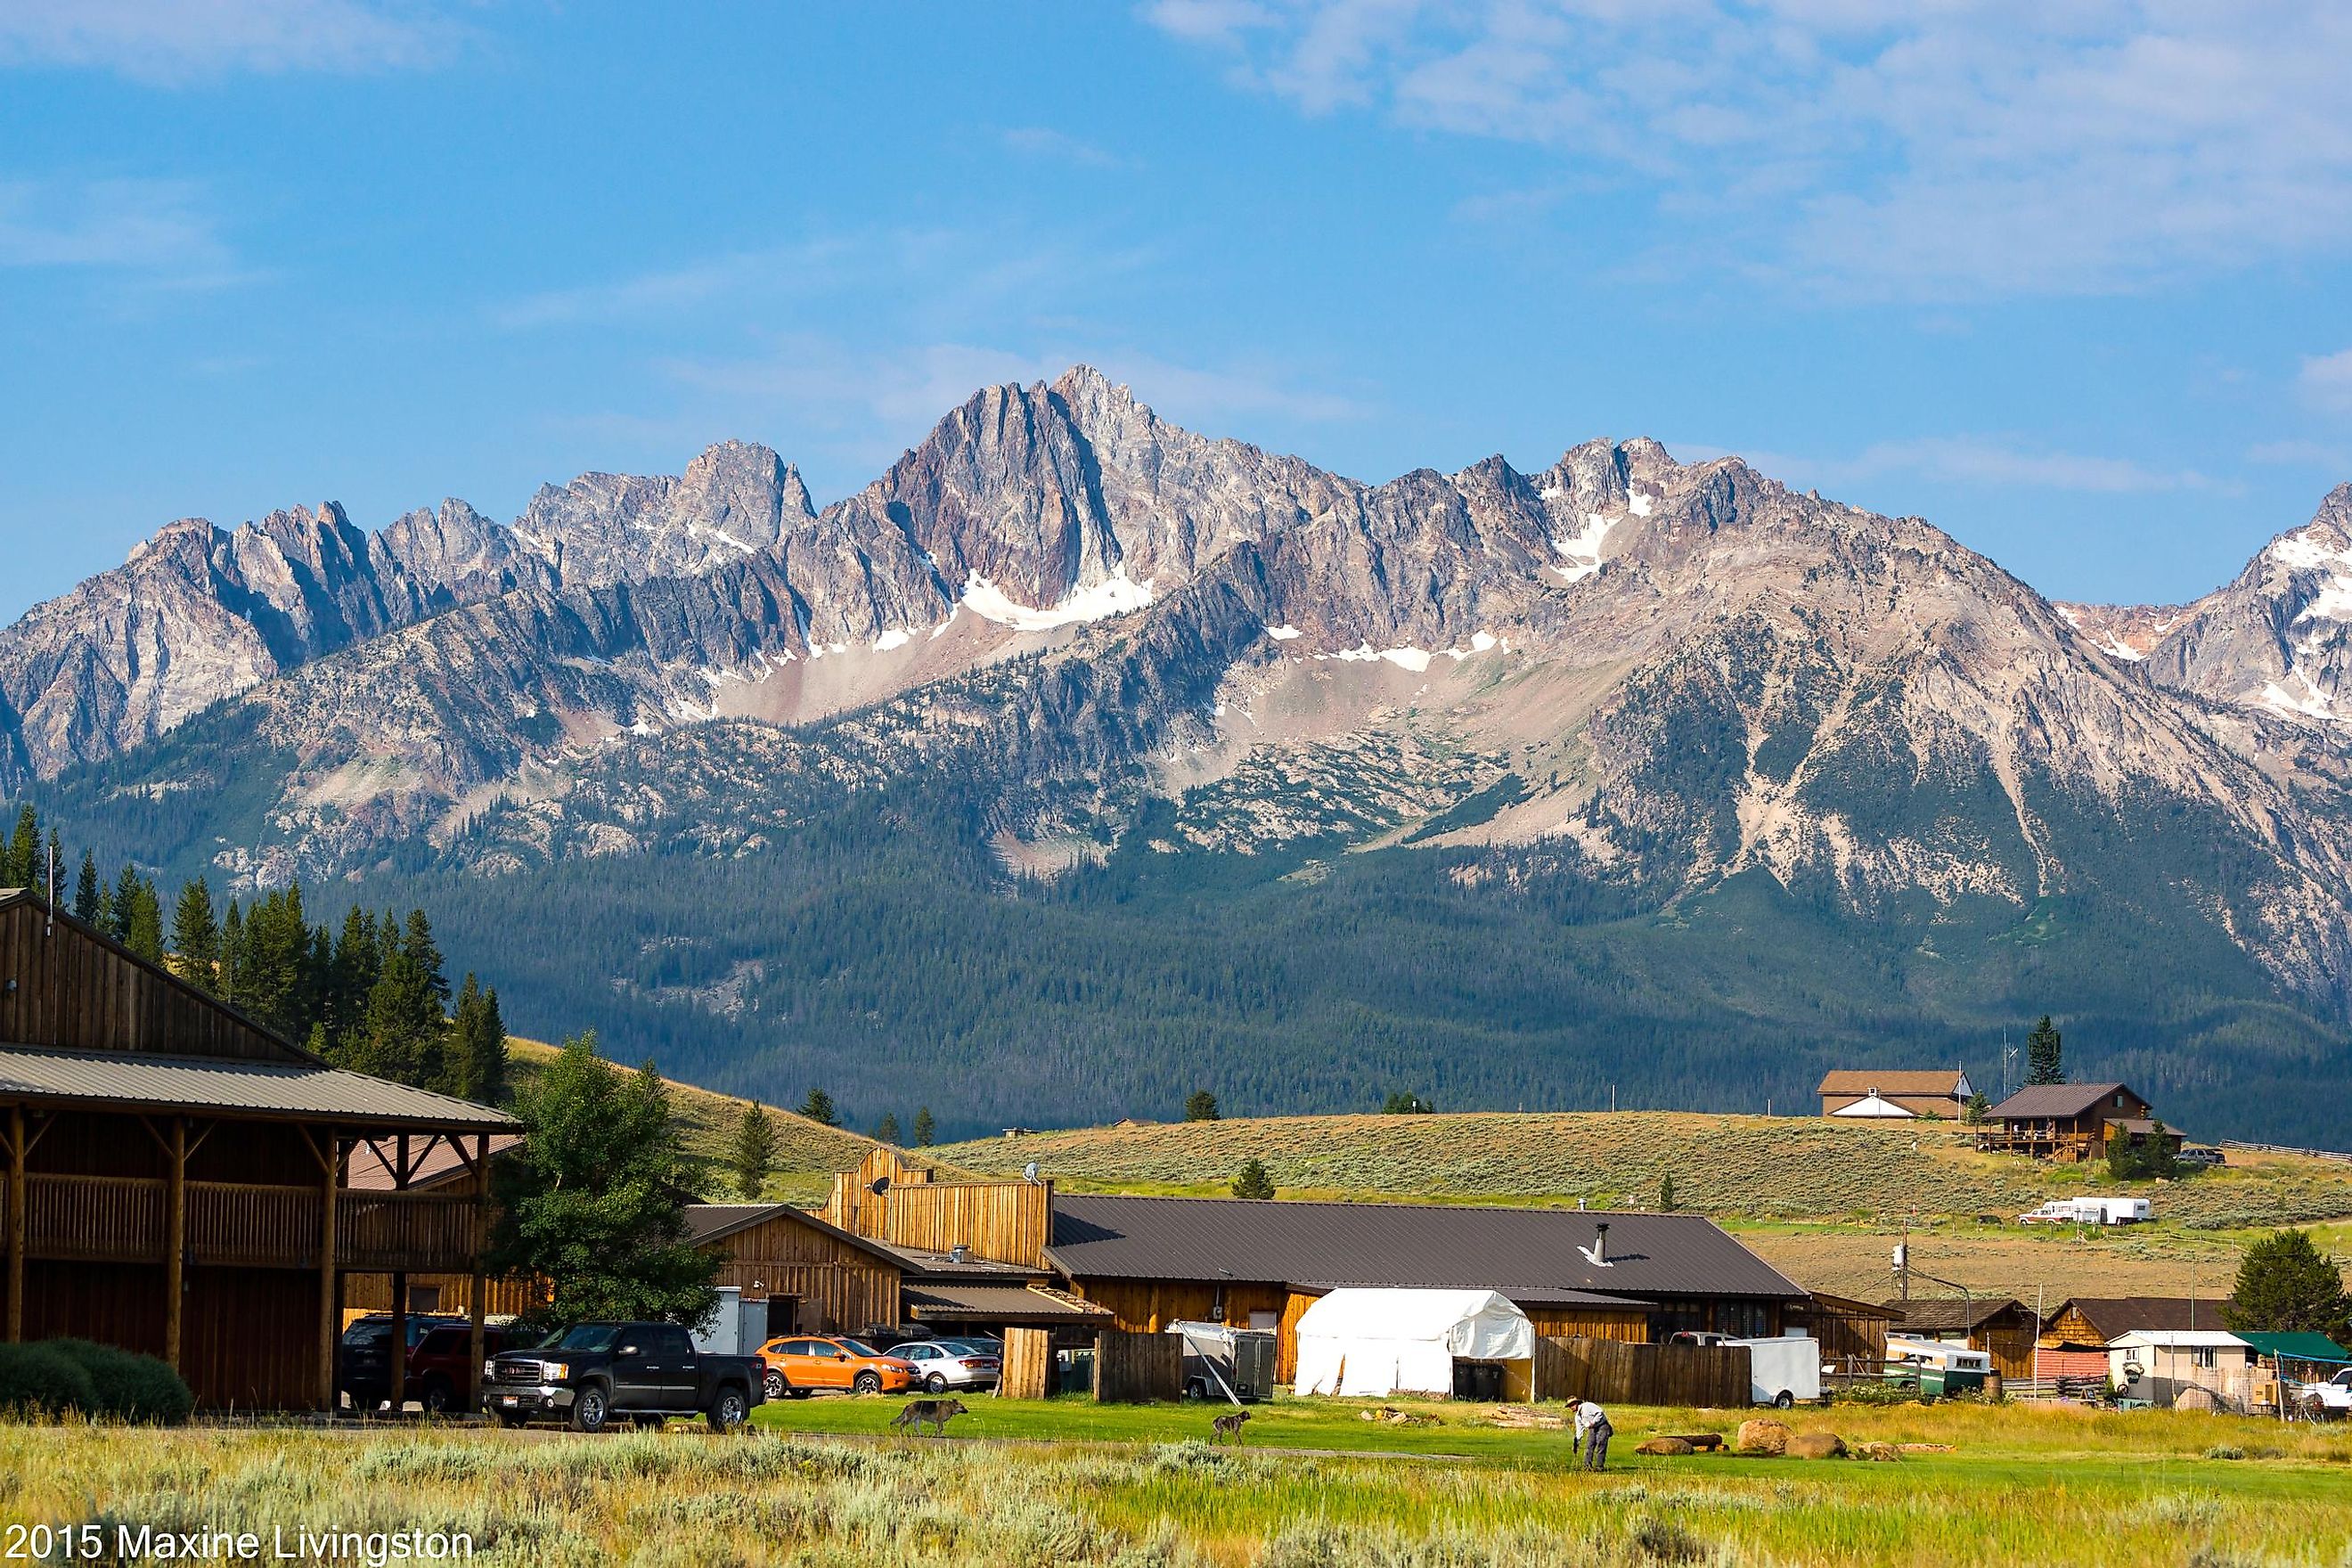 The Sawtooth Mountains rising over Stanley, Idaho.